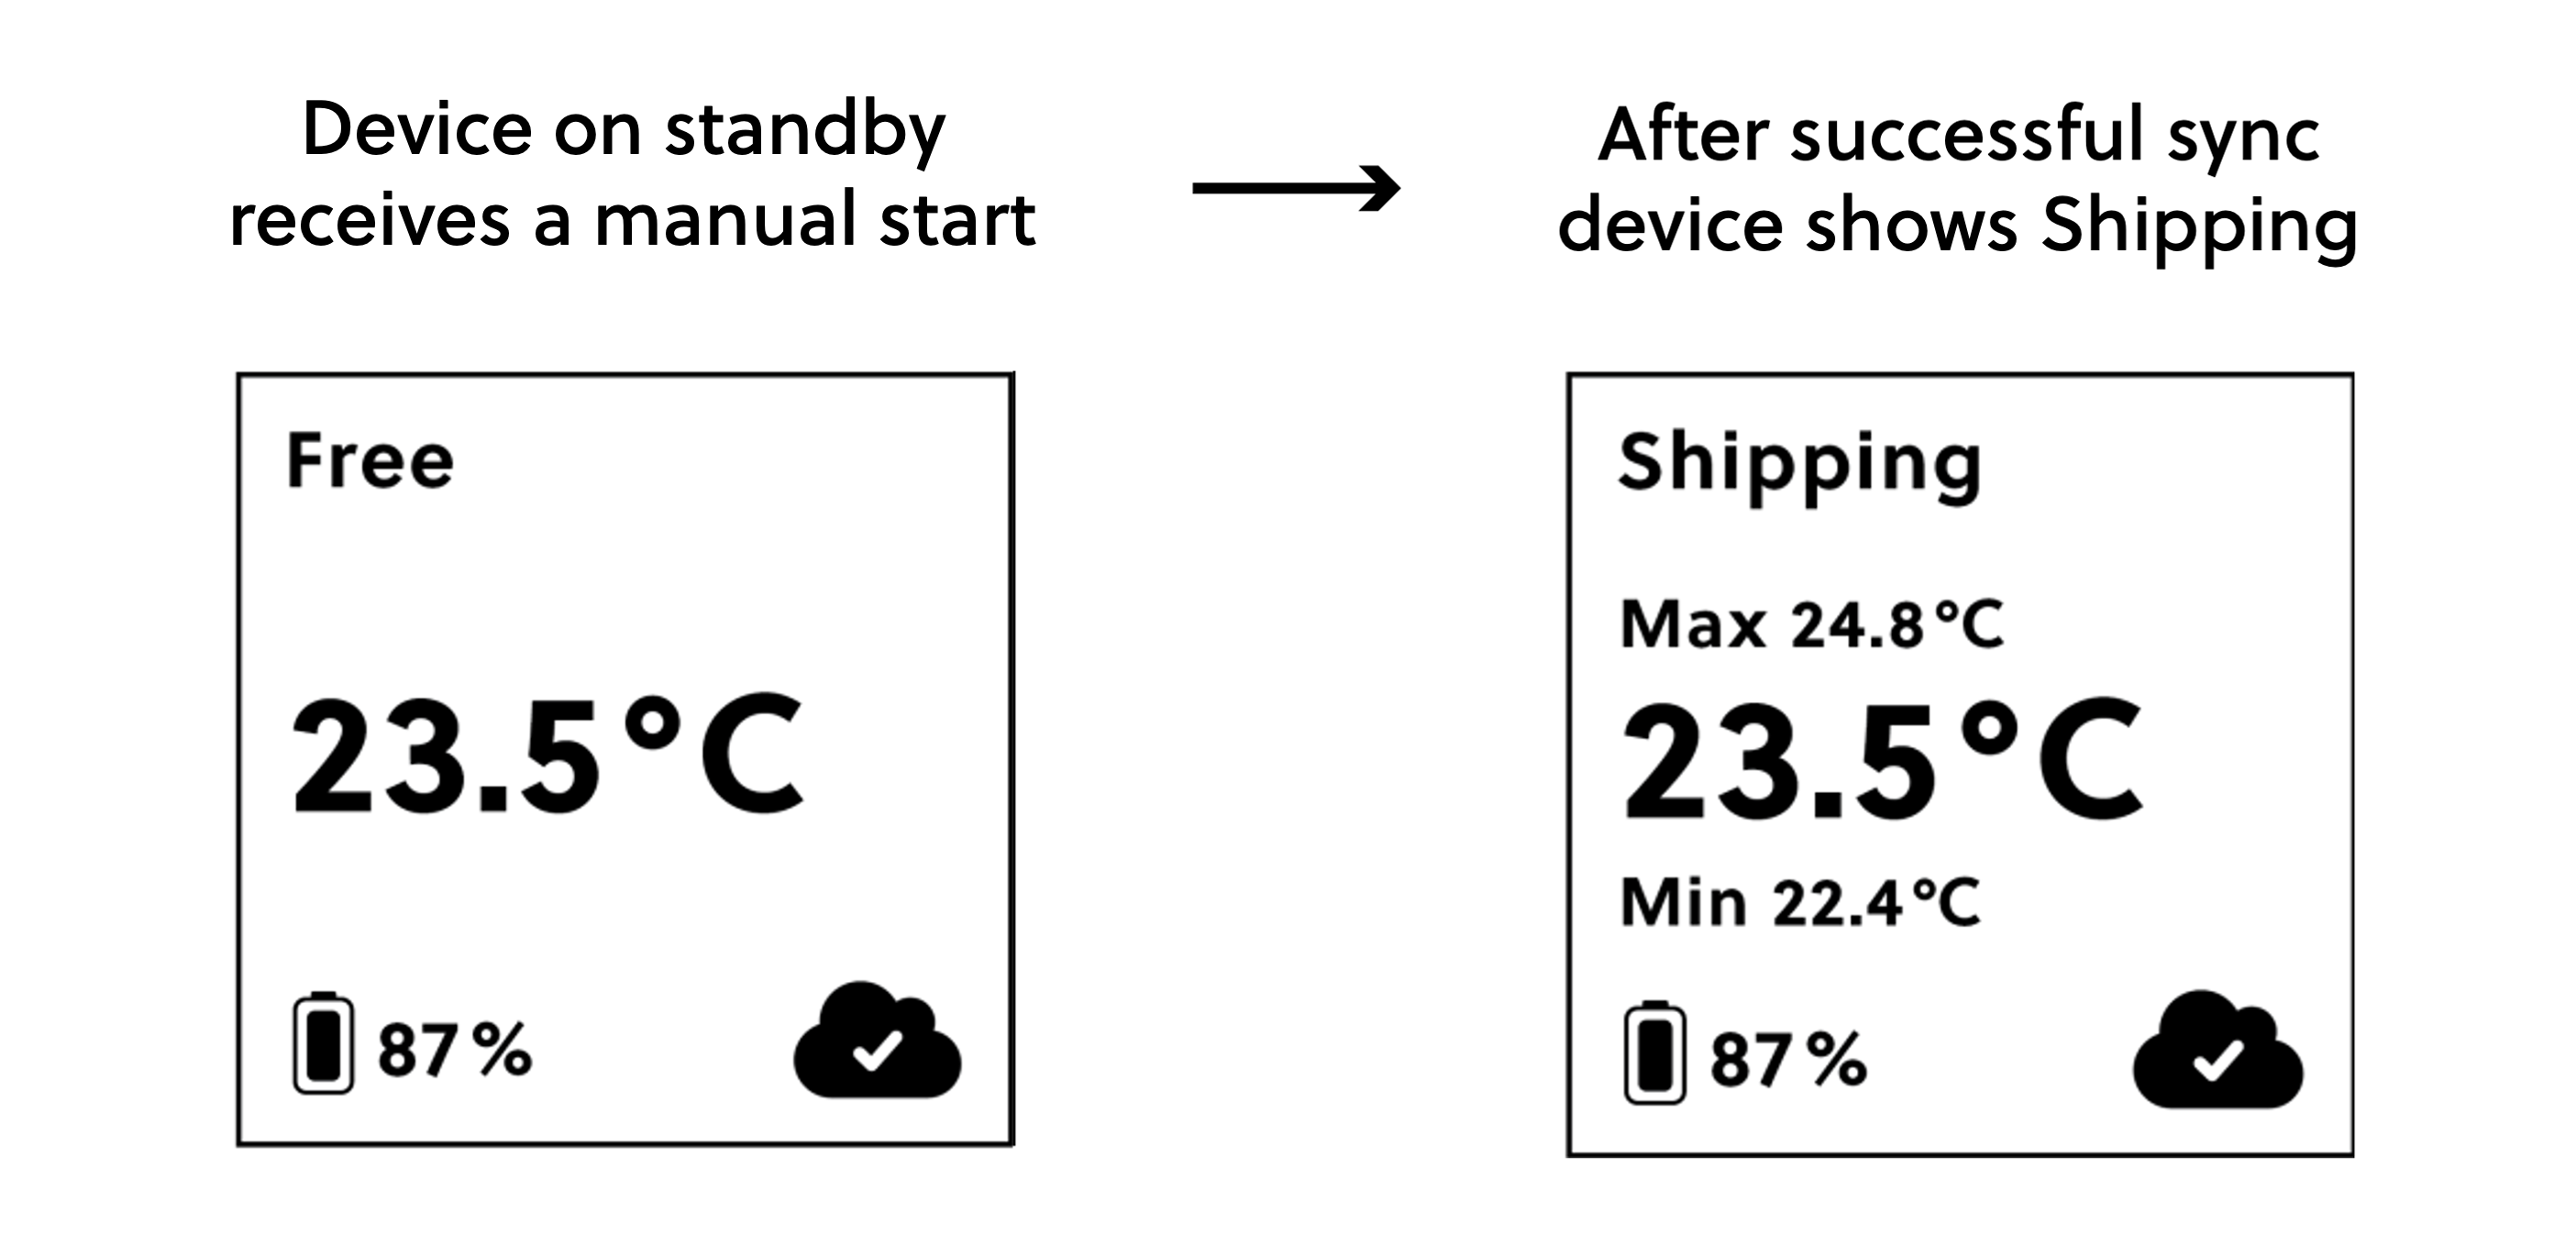 Saga Logger display in standby mode when receiving manual start. After successful sync, it shows "Shipping".